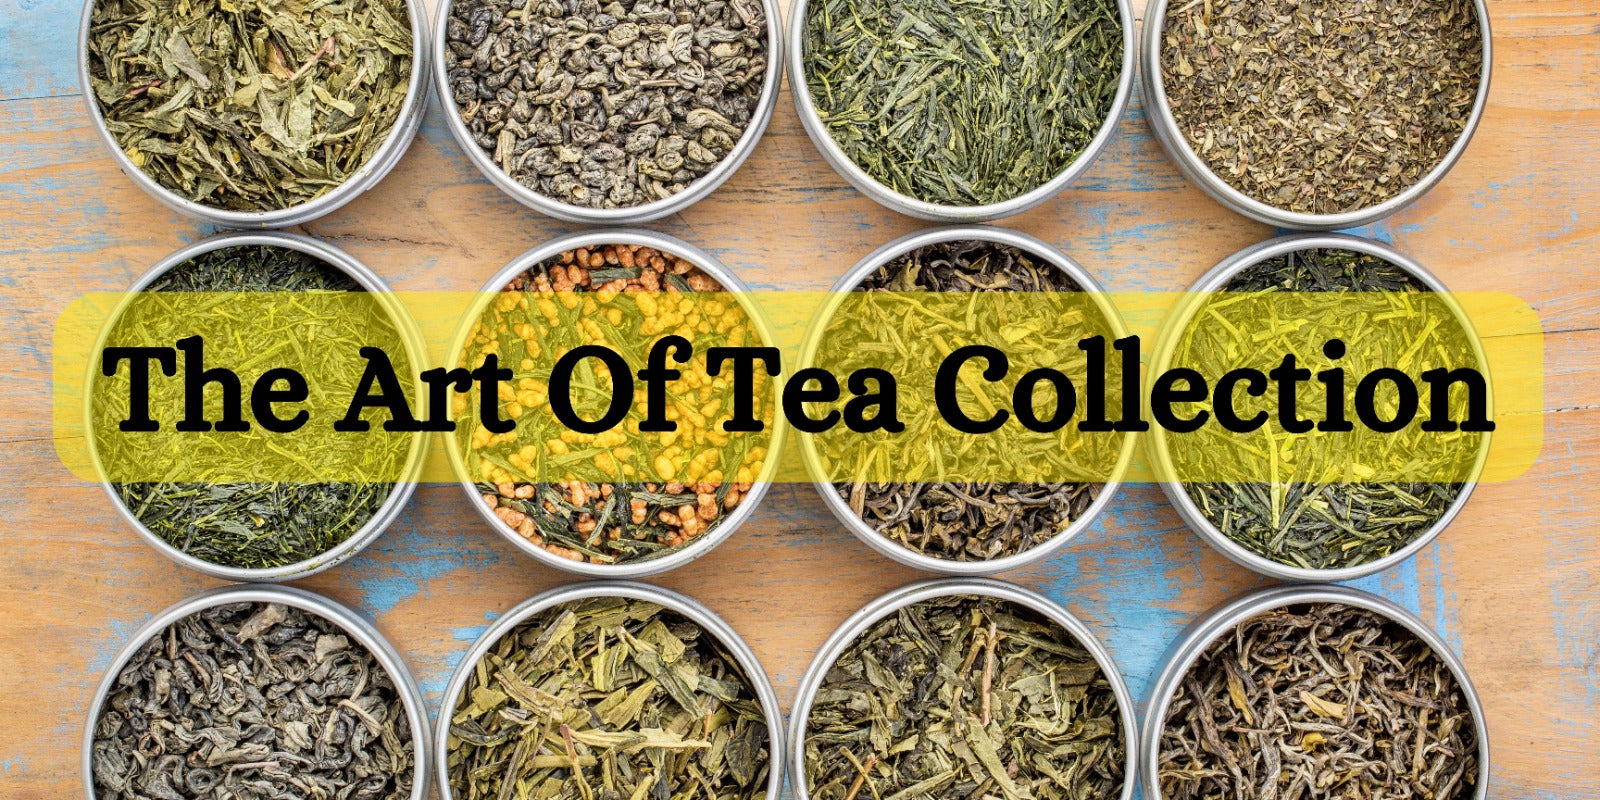 The Art Of Tea Collection